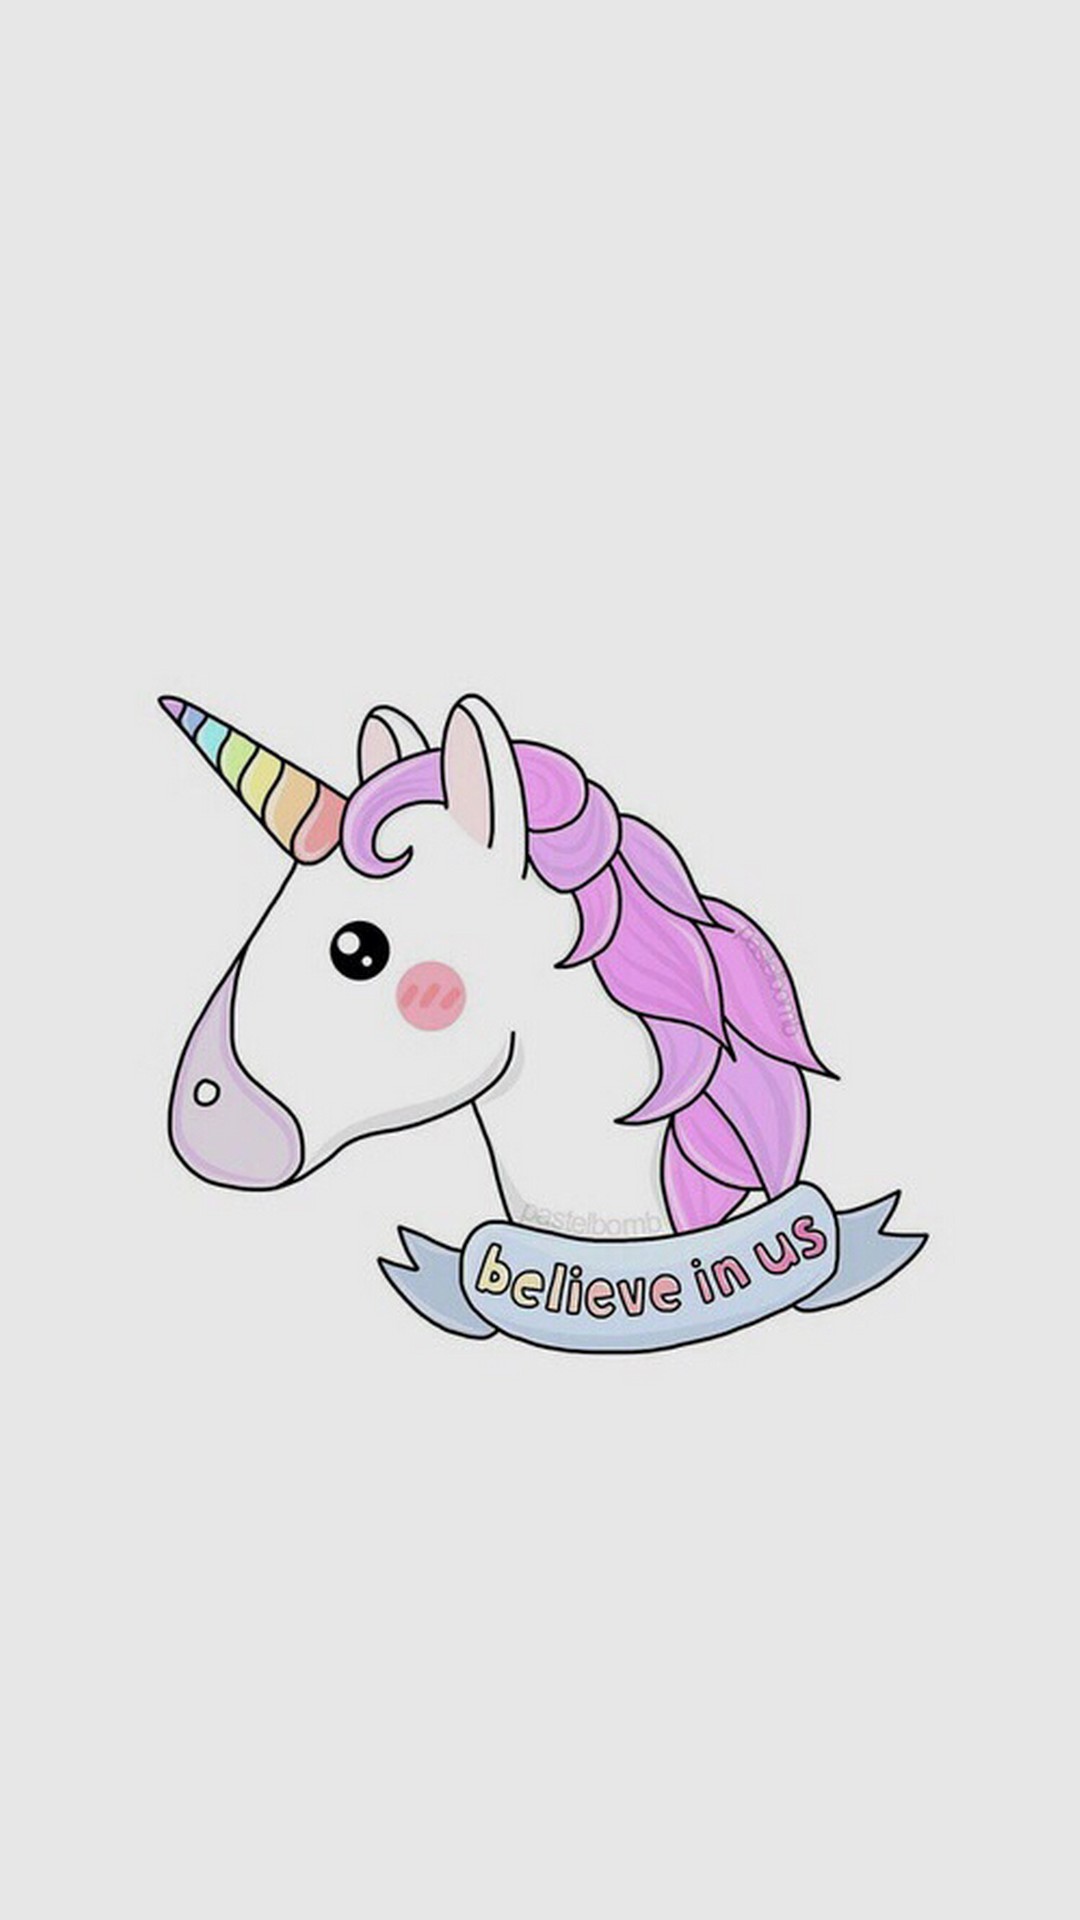 Cute Unicorn Wallpaper Android With high-resolution 1080X1920 pixel. You can use this wallpaper for your Android backgrounds, Tablet, Samsung Screensavers, Mobile Phone Lock Screen and another Smartphones device